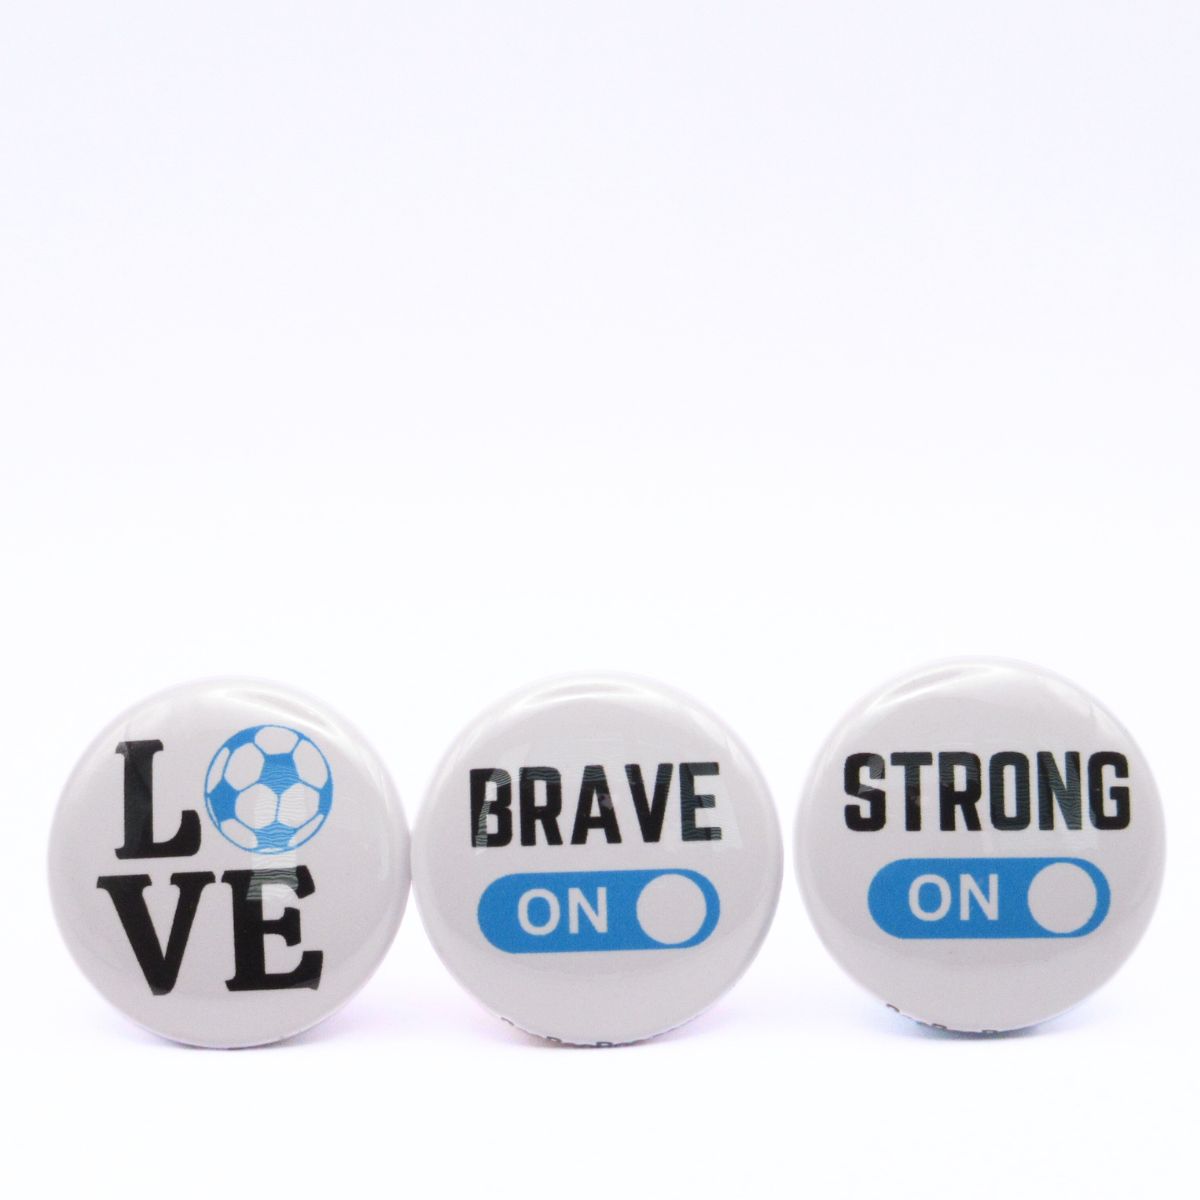 BooBooRoo Pinback Button (i.e. button, badge, pin) 3-pack displaying soccer love, fierce mode on, and strong mode on. Blue background for mode indicator and soccer ball.